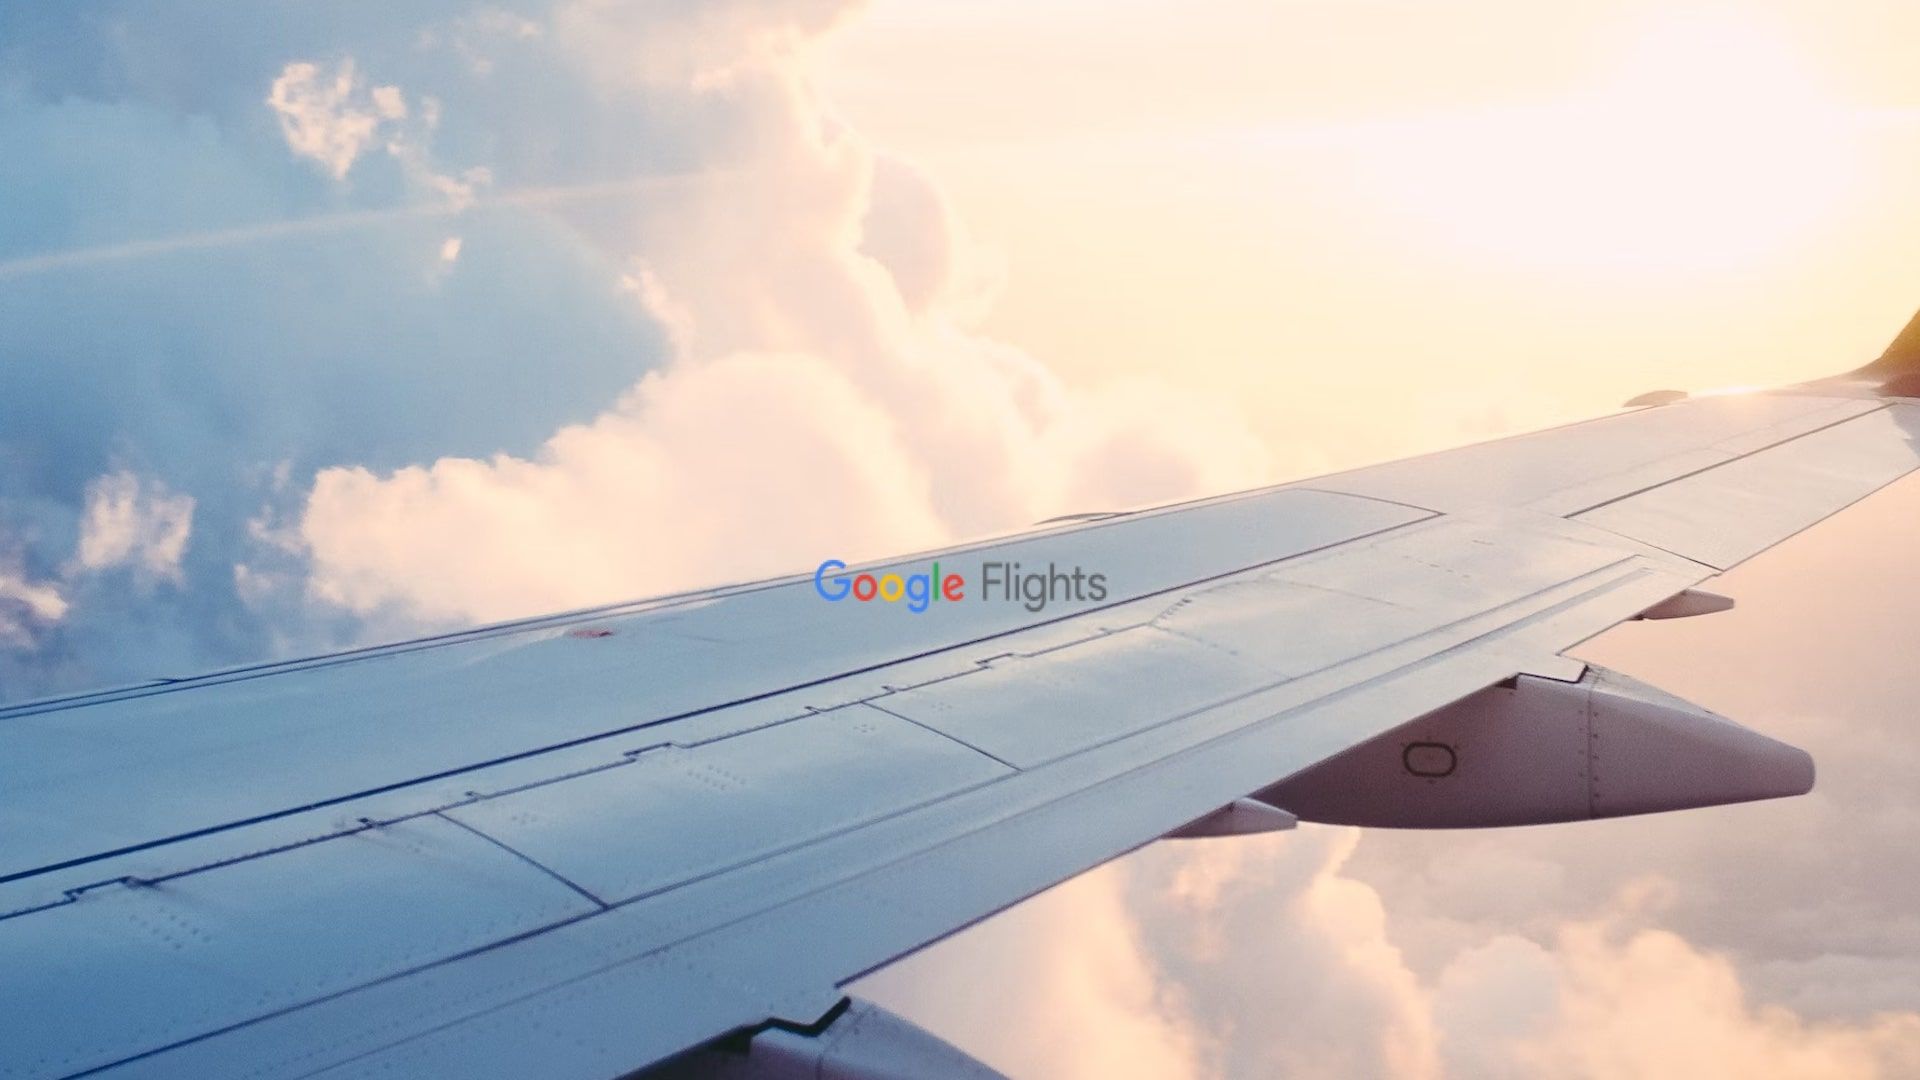 9 simple Google Flights tips to help you plan your next trip